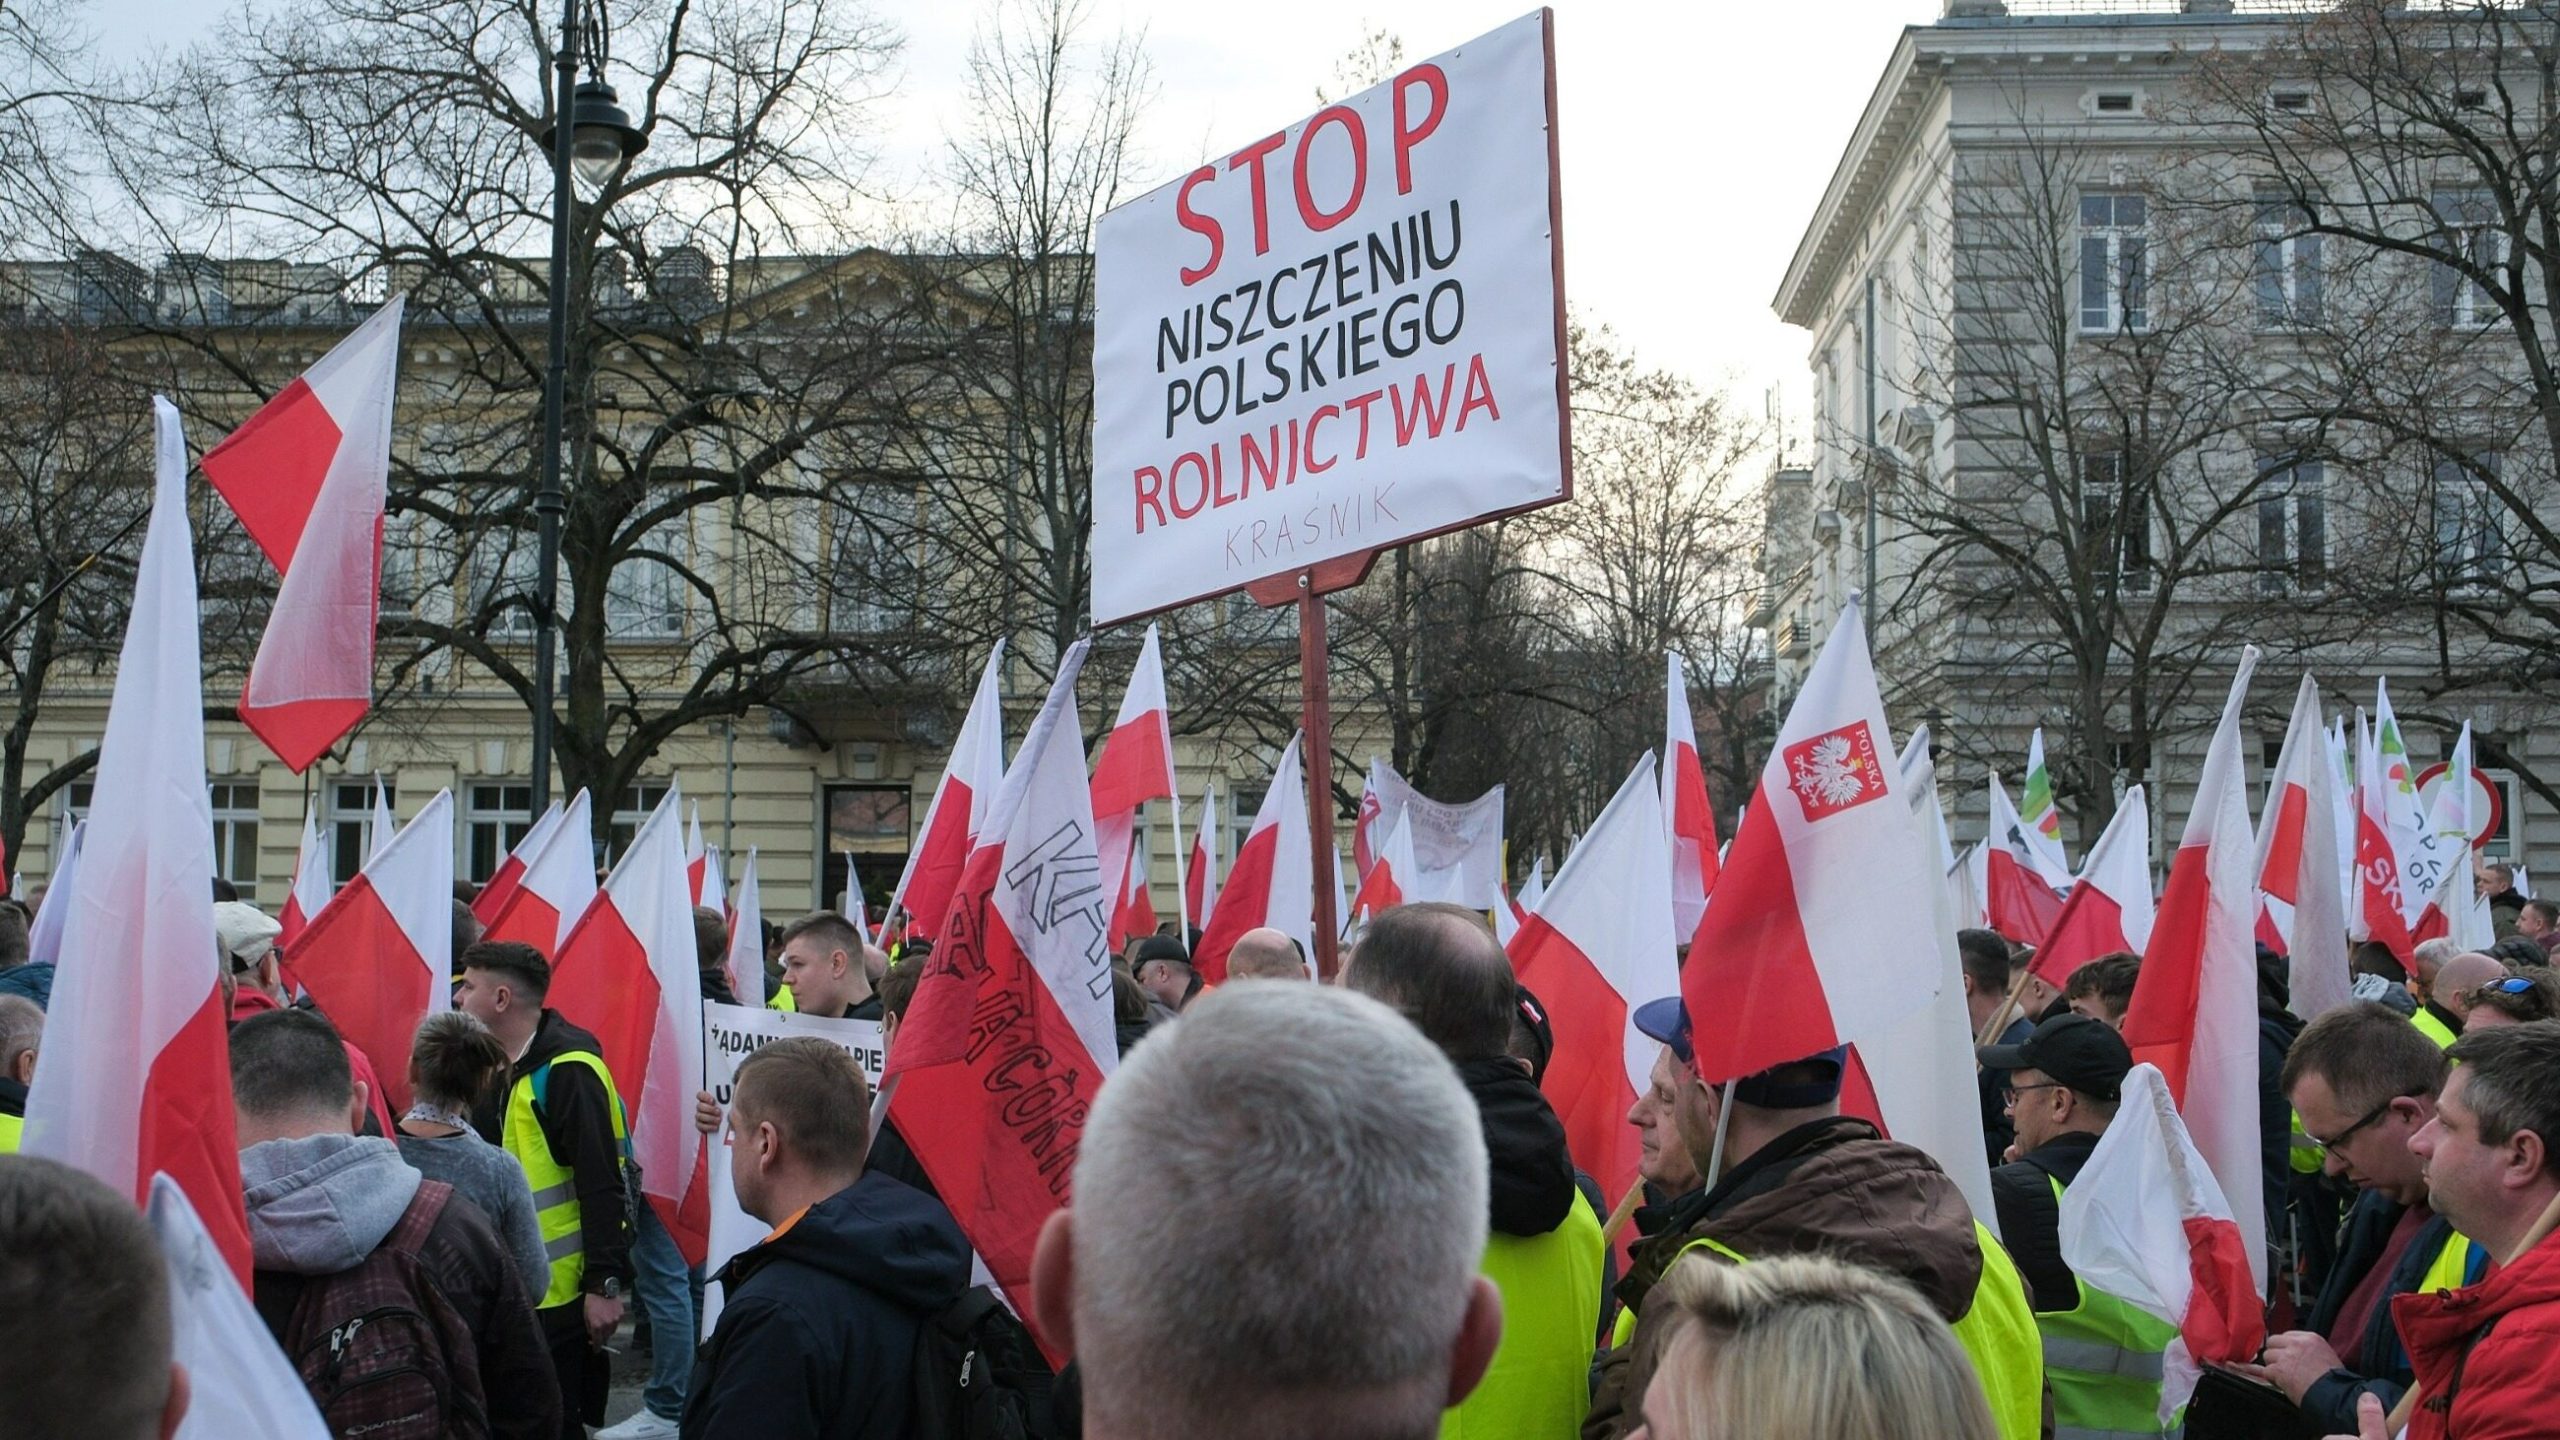 Farmers' protest in Warsaw.  Rafał Trzaskowski about attendance.  "On the same terms"